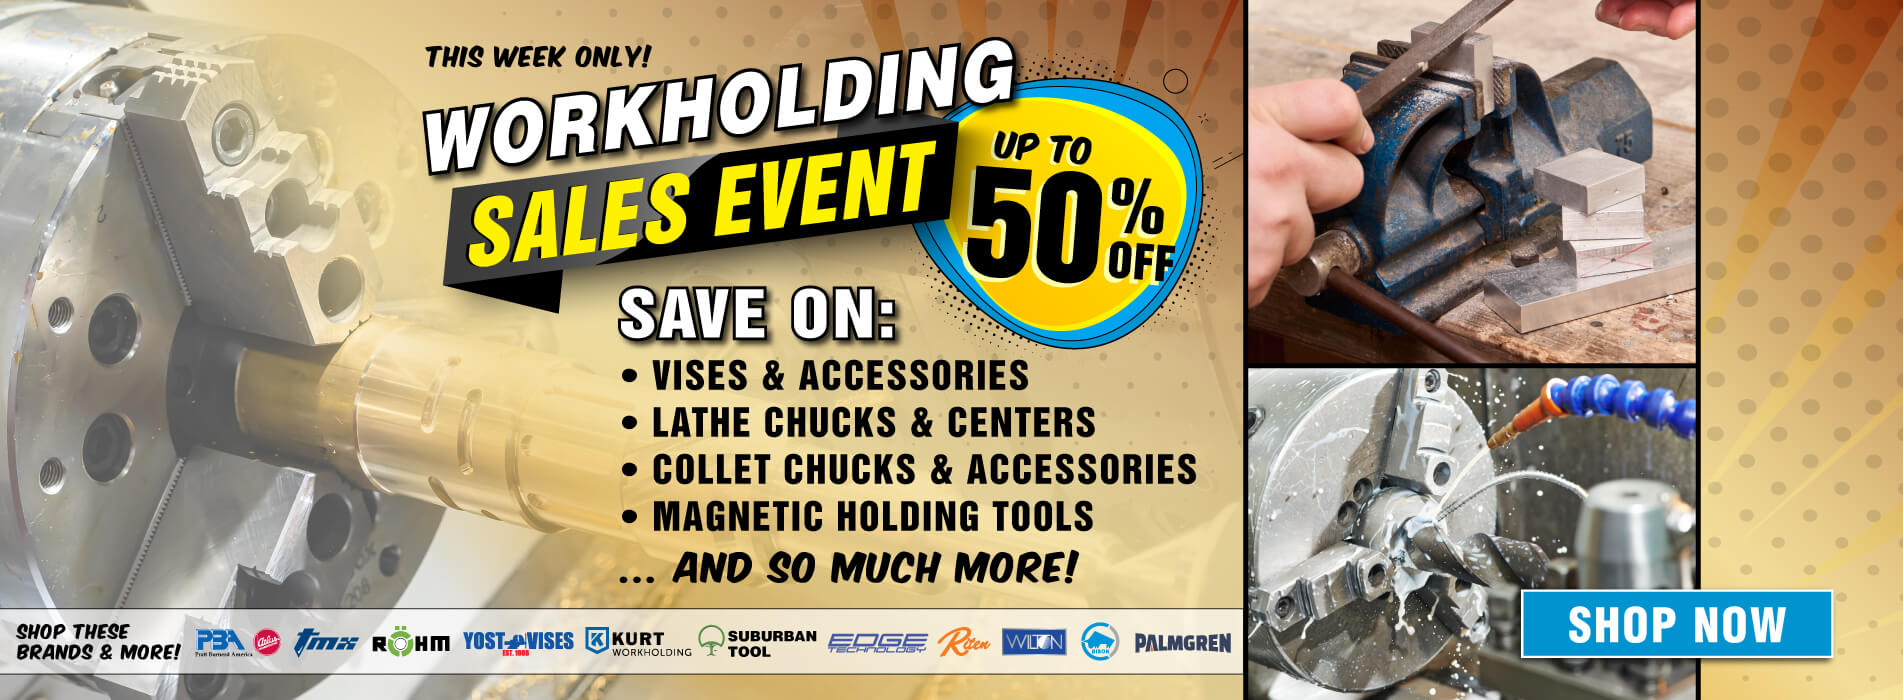 Workholding Sales Event! Up to 50% Off! Save on Rohm, PBA, Wilton, TMX, & more! 